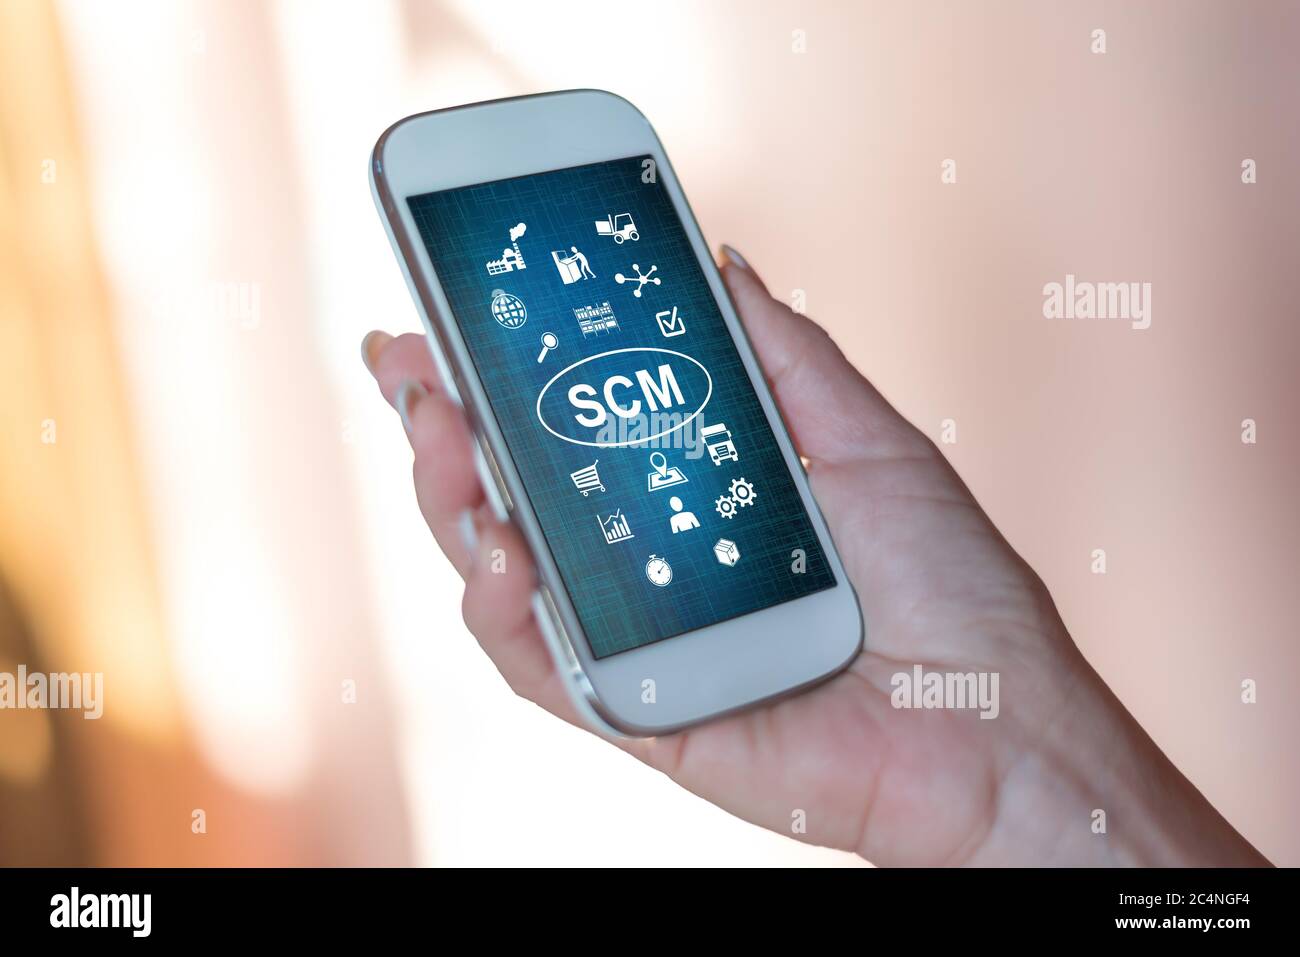 Smartphone screen displaying a scm concept Stock Photo